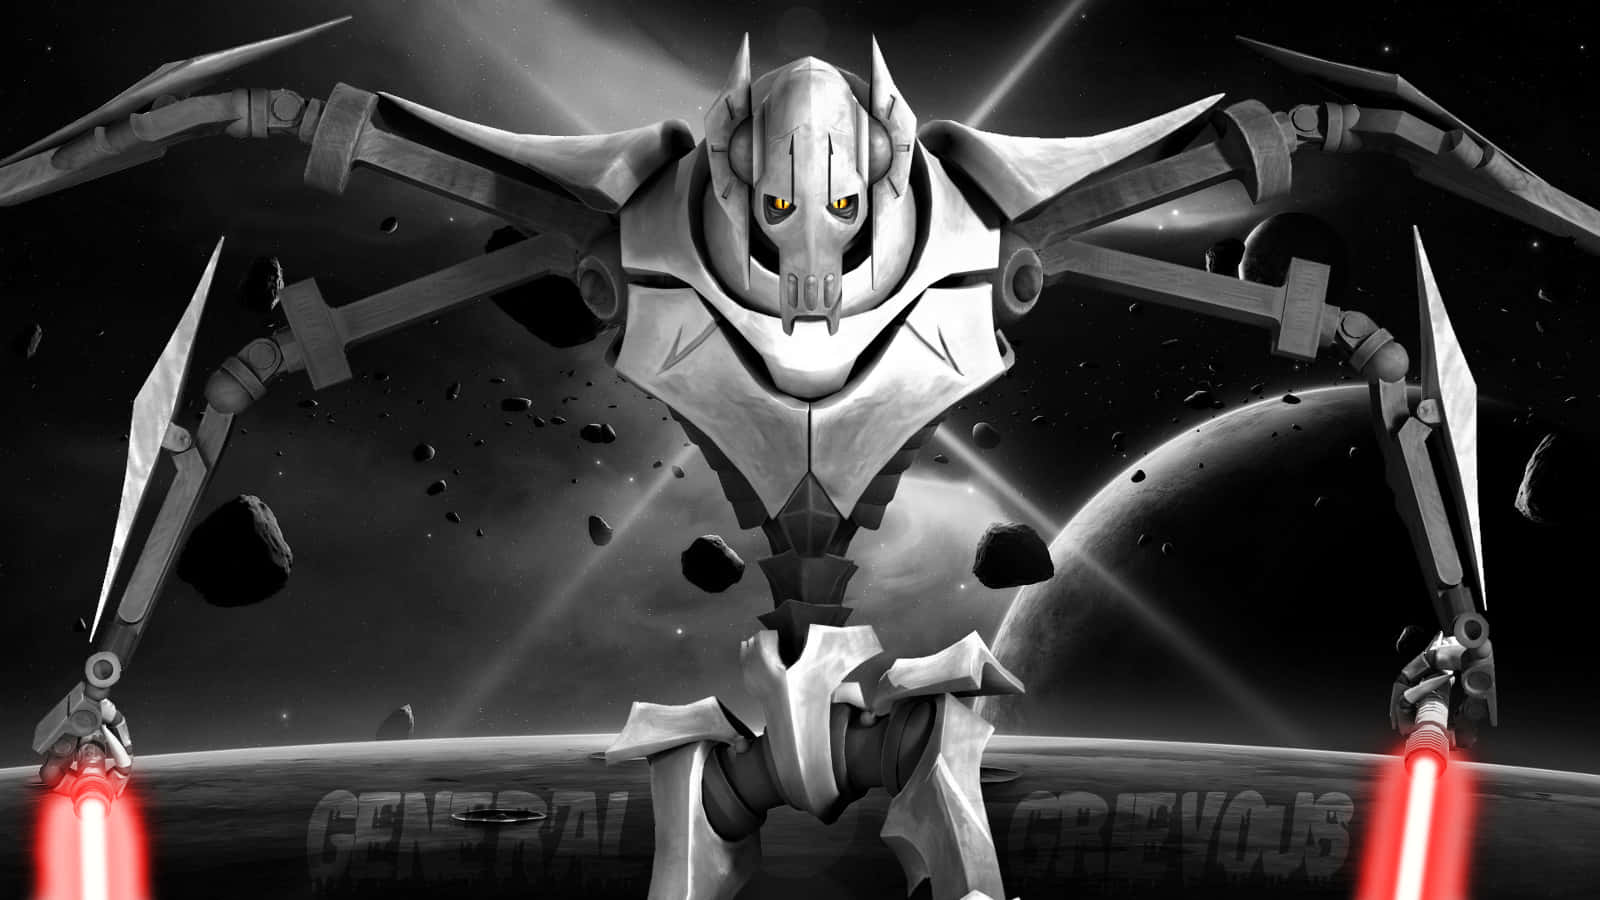 General Grievous, The Robotic Leader Of The Separatist Droid Army